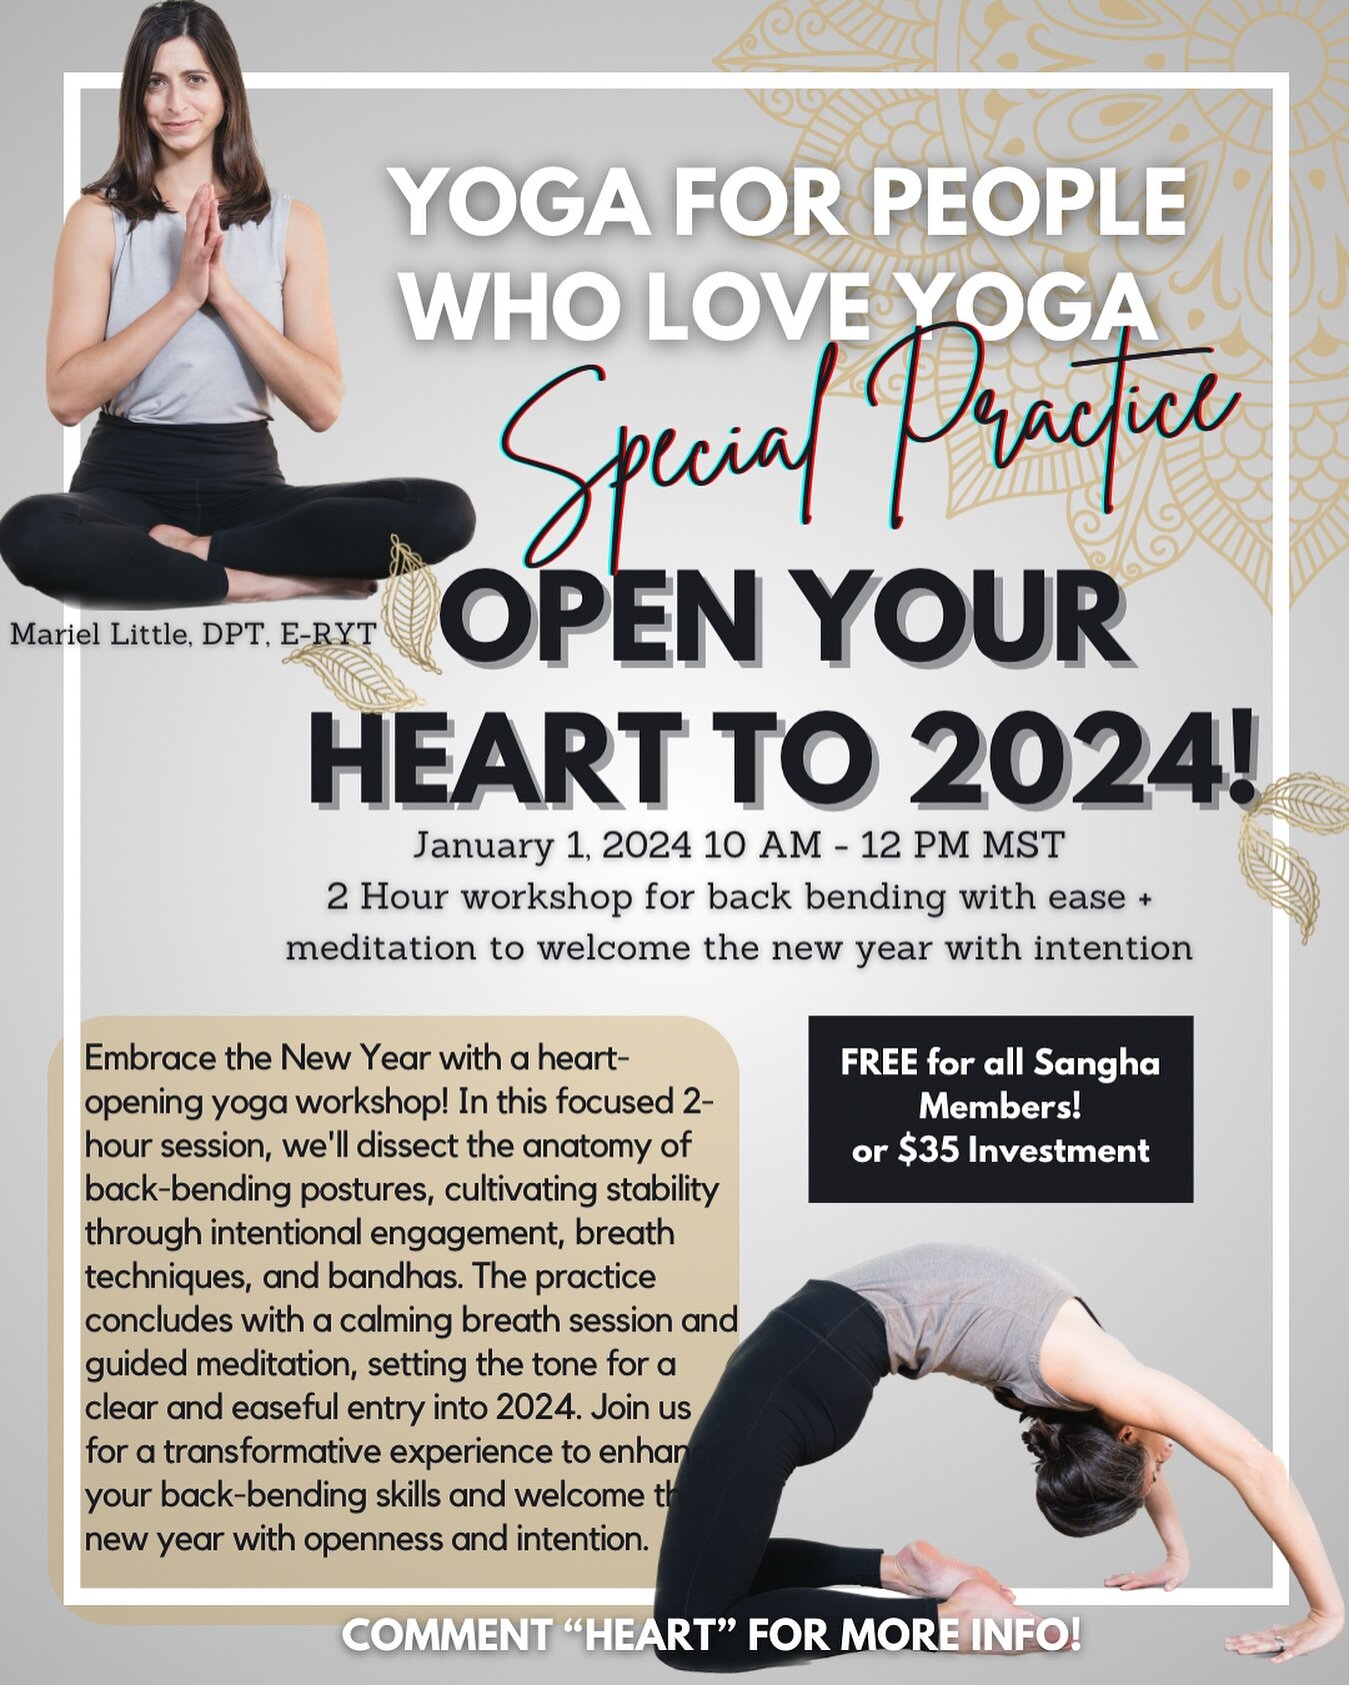 🎉 Special Workshop + Masterclass 🎉Embrace the New Year with a heart-opening yoga workshop! 

In this focused 2-hour session, we'll dissect the anatomy of back-bending postures, cultivating stability through intentional engagement, breath techniques